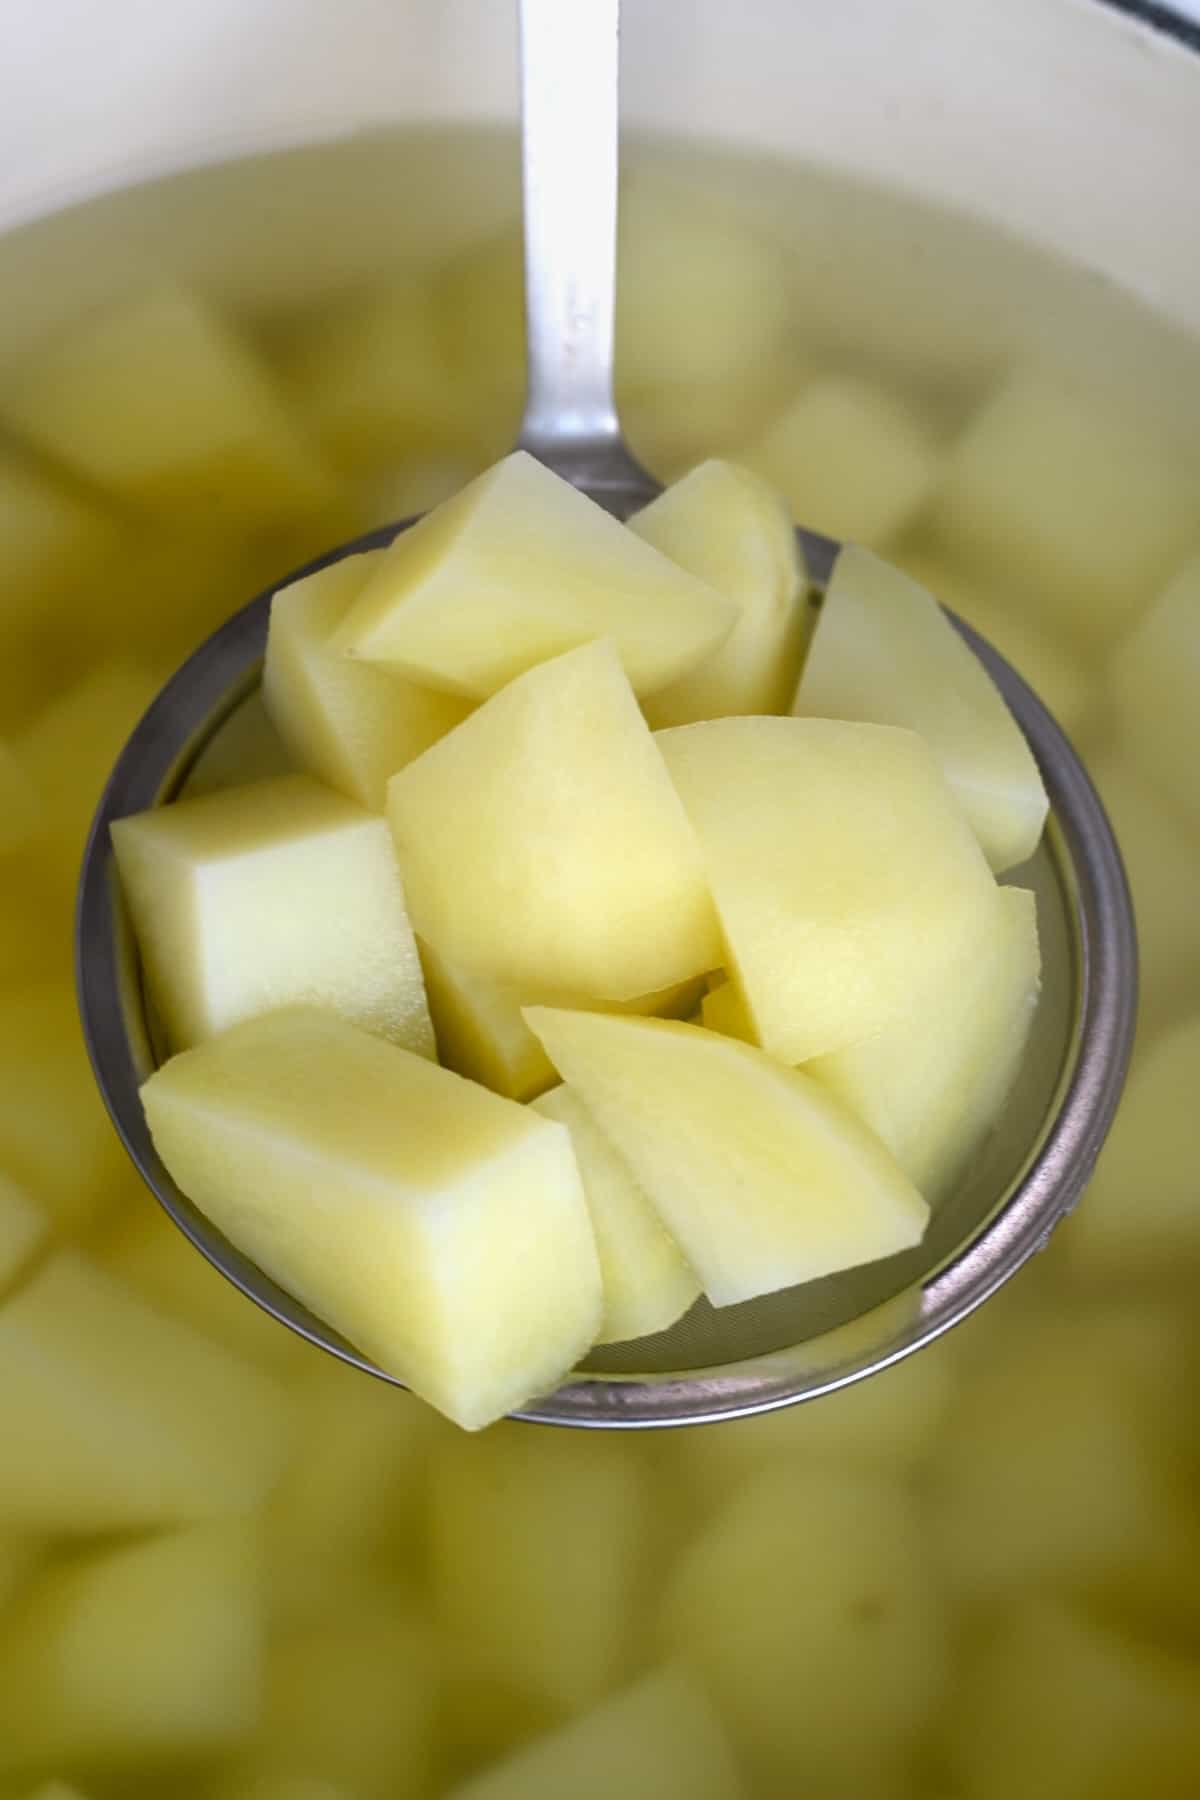 Boiled cubed potatoes